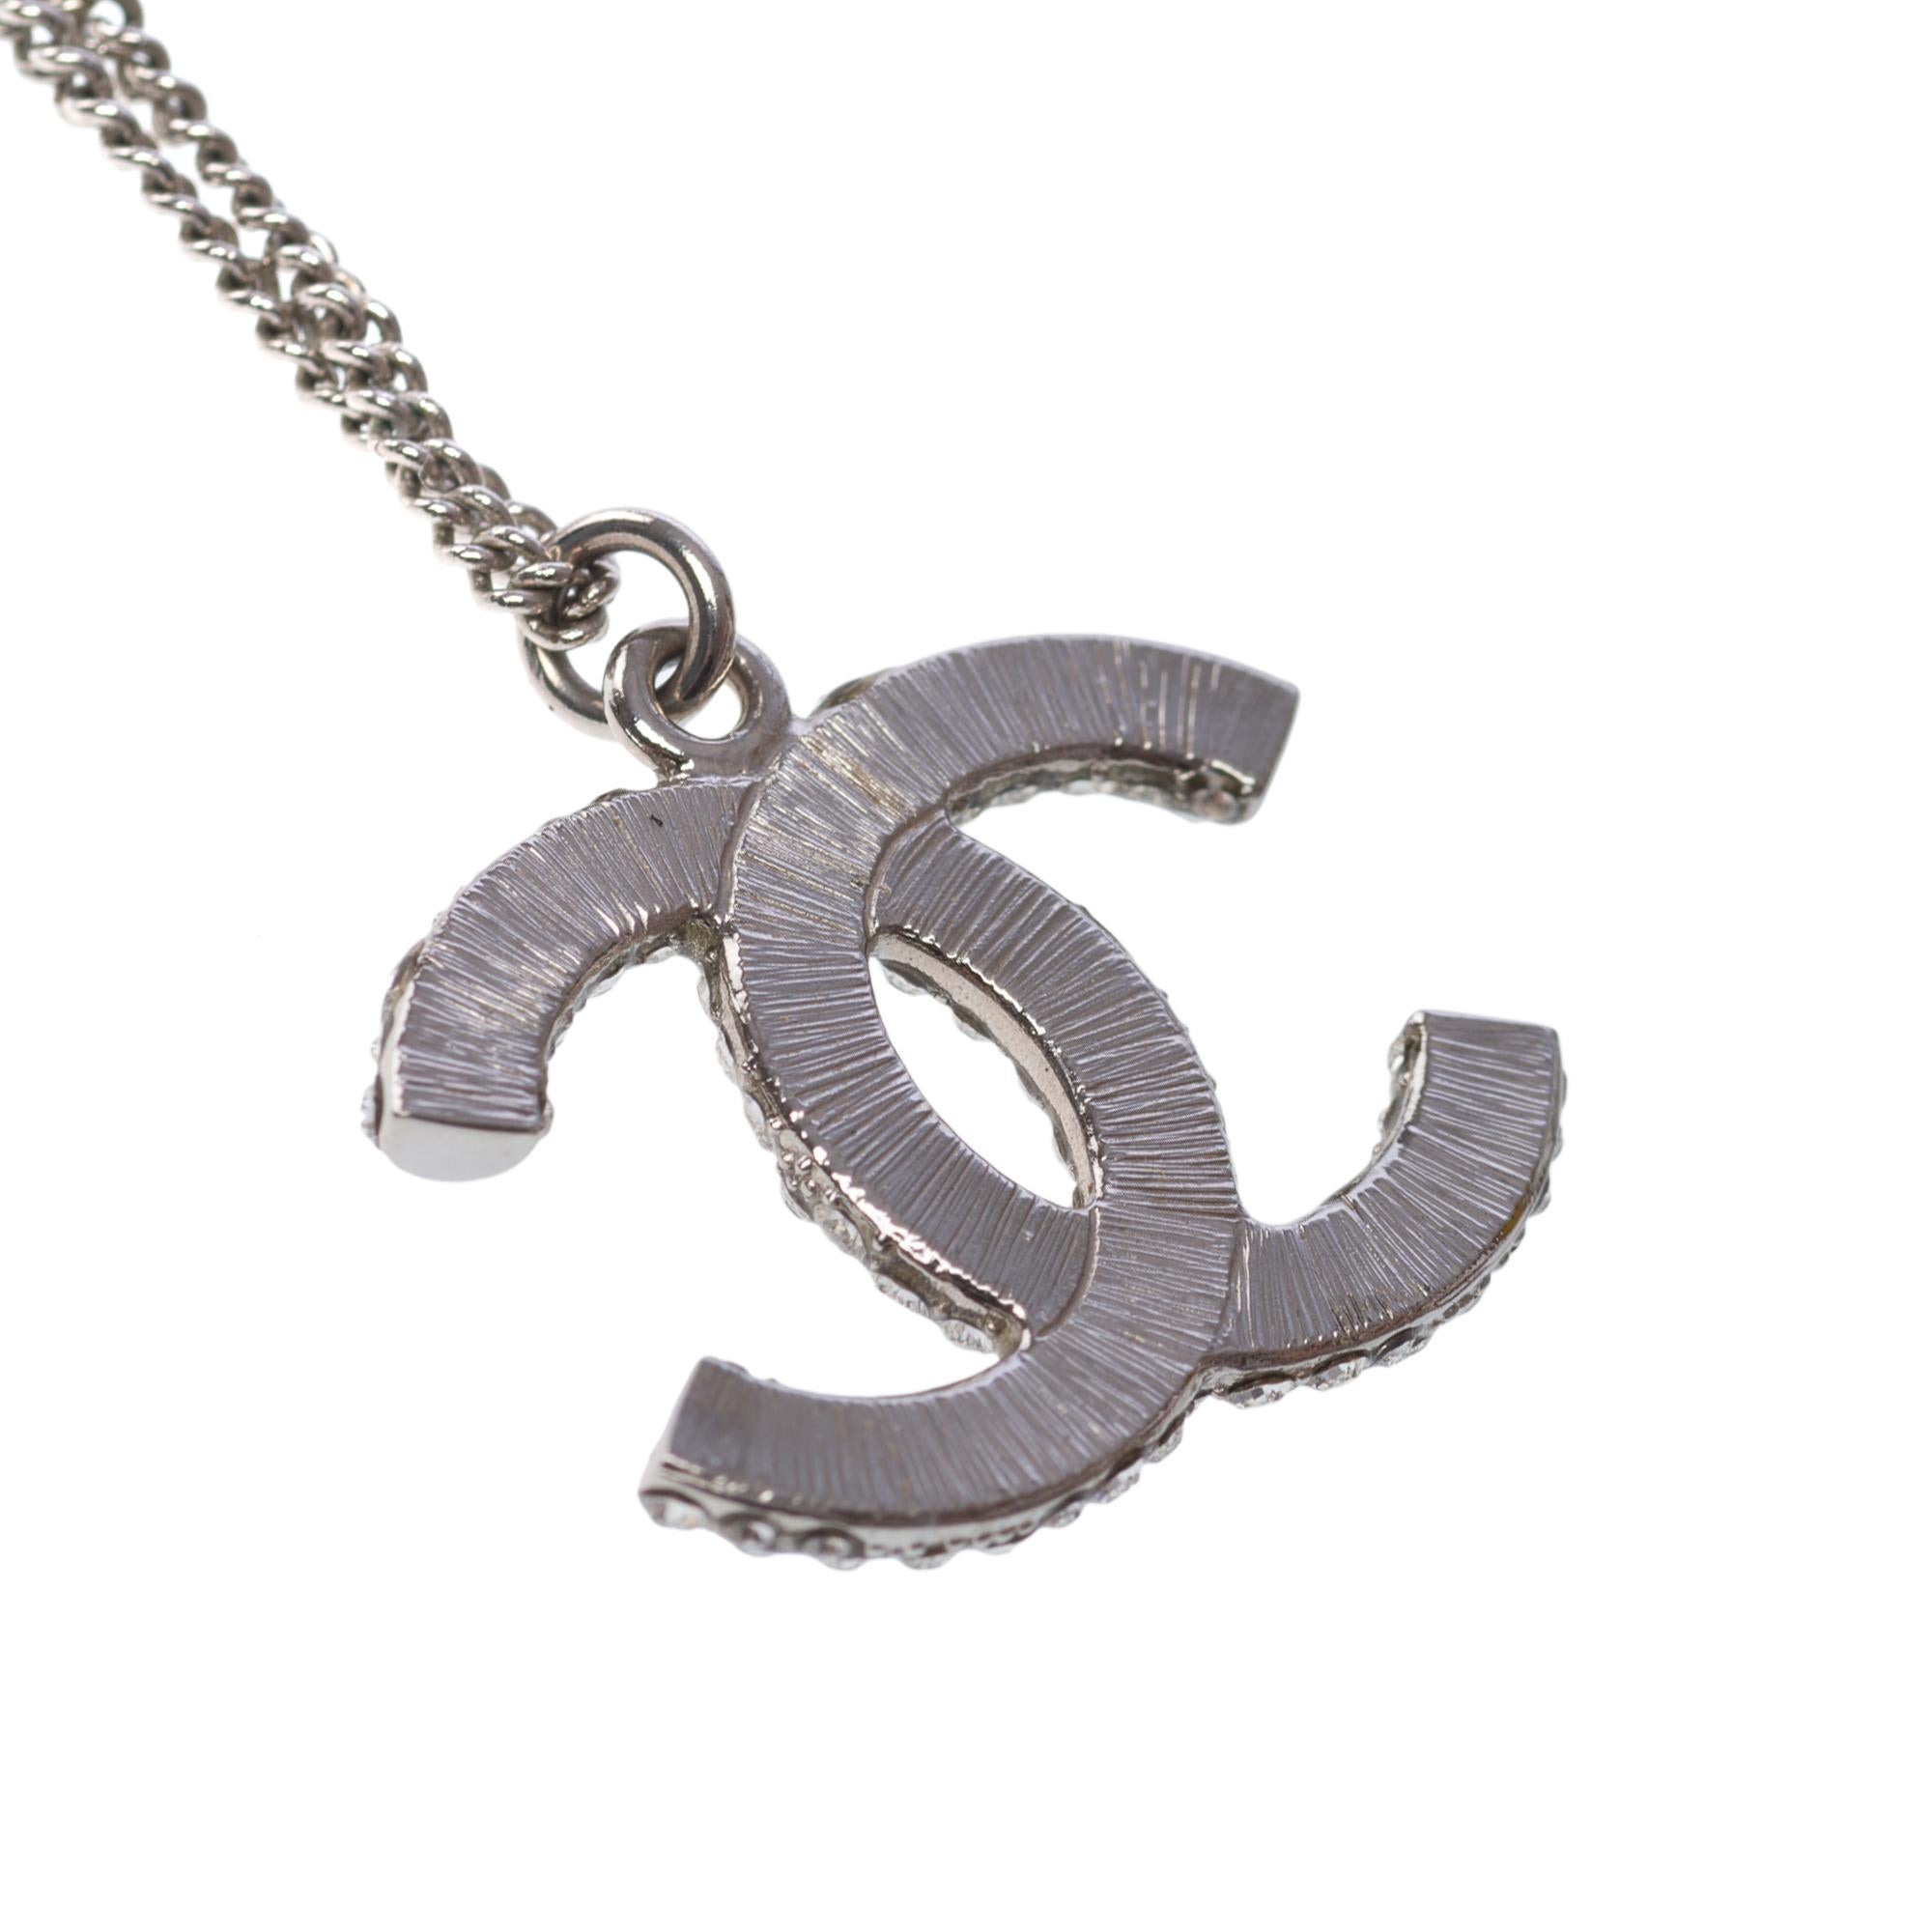 Uncut  Chanel Necklace CC in silver color metal with crystal